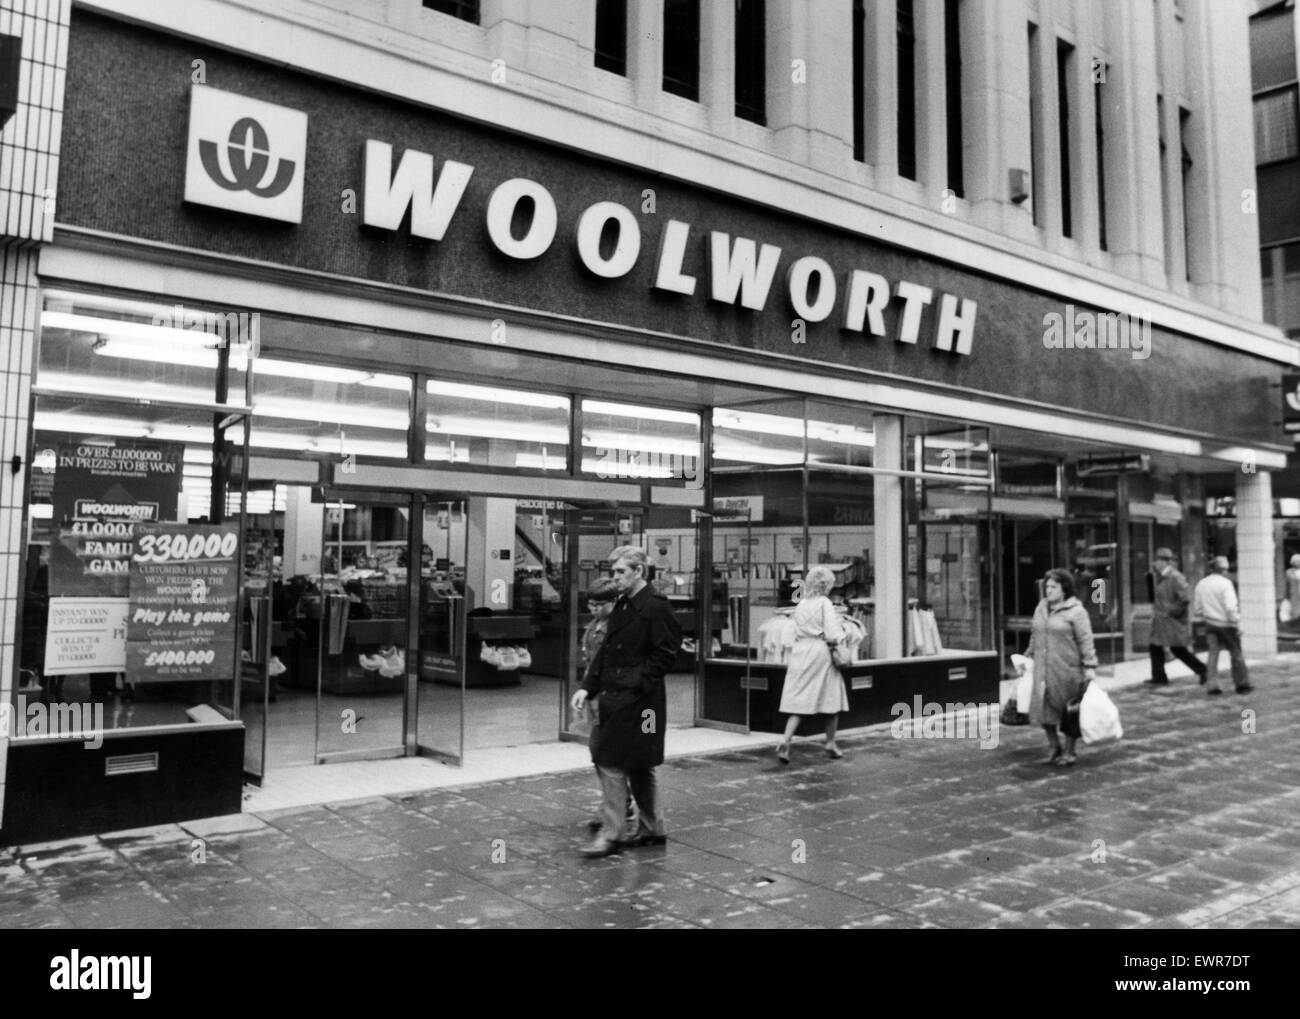 Woolworth Department Store, Northumberland Street, Newcastle, 4 agosto 1984. Foto Stock